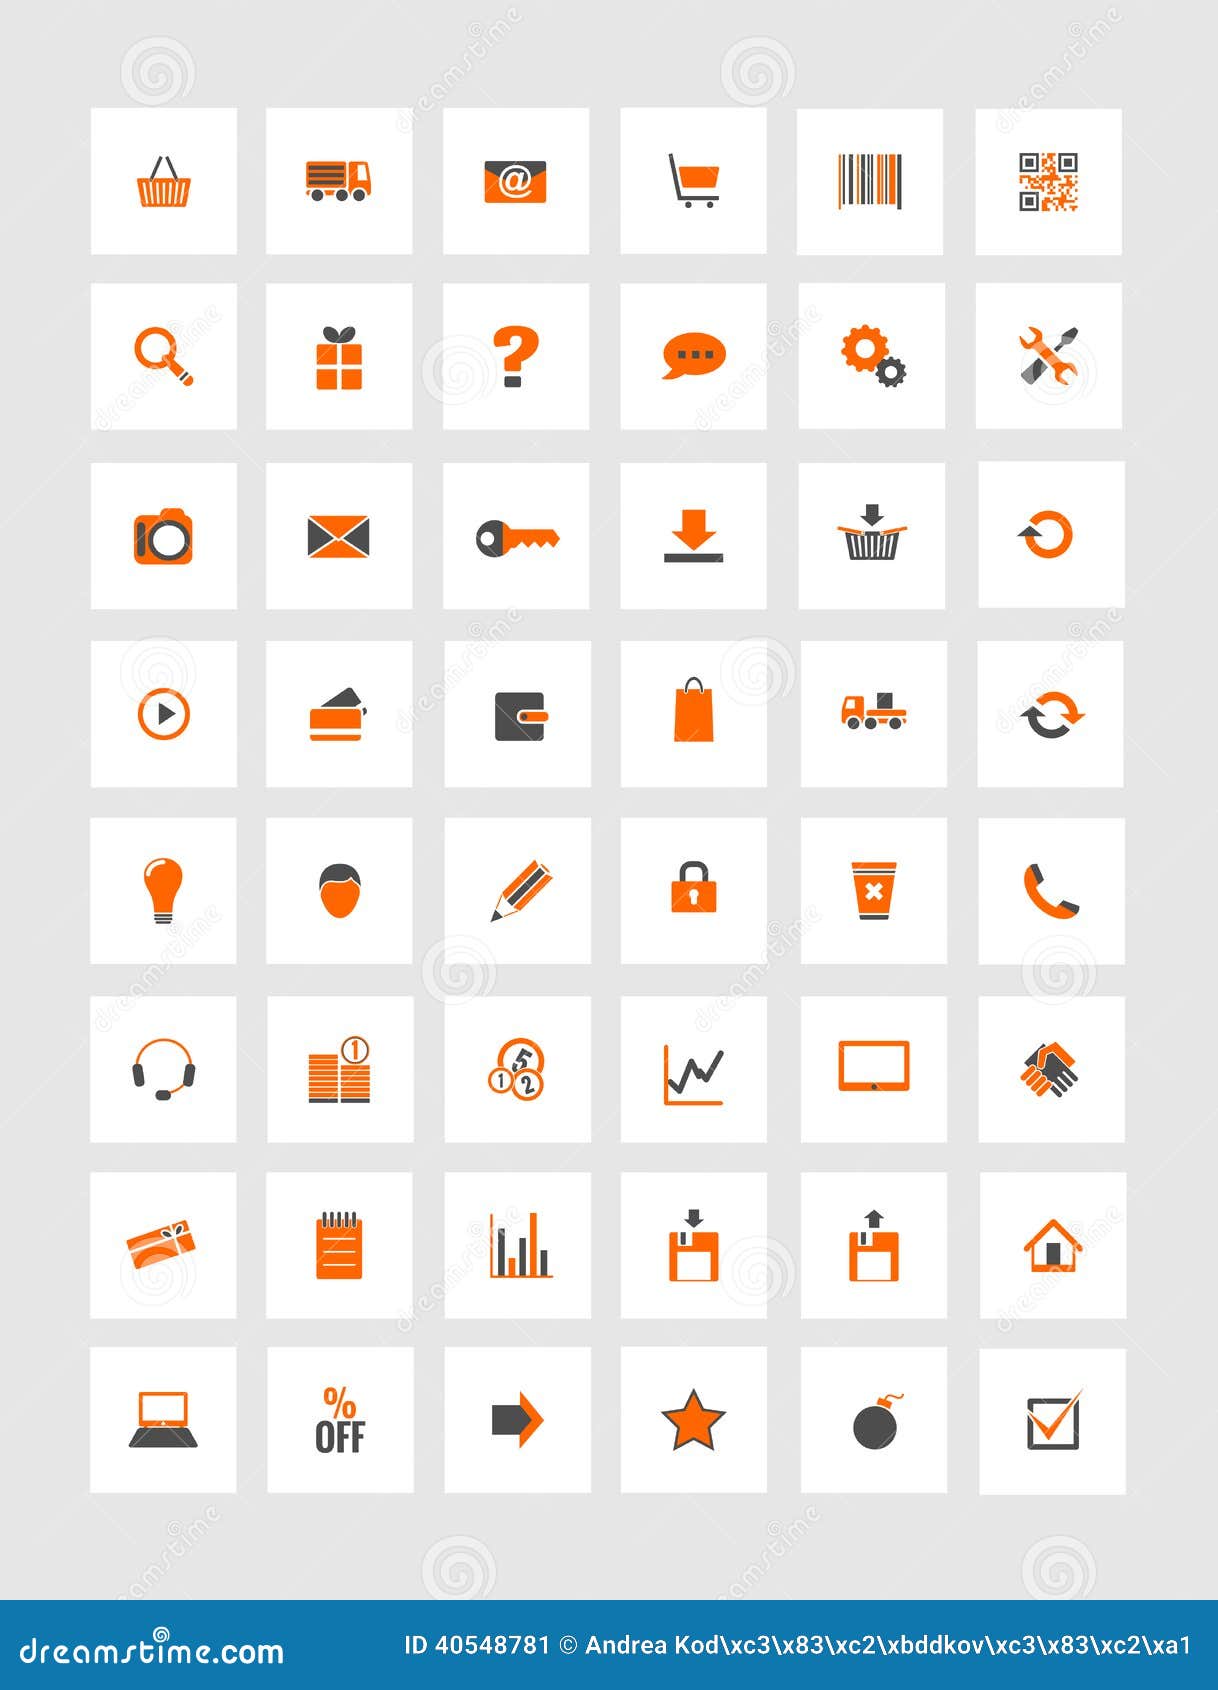 orange icons for eshop, suitable for flat 